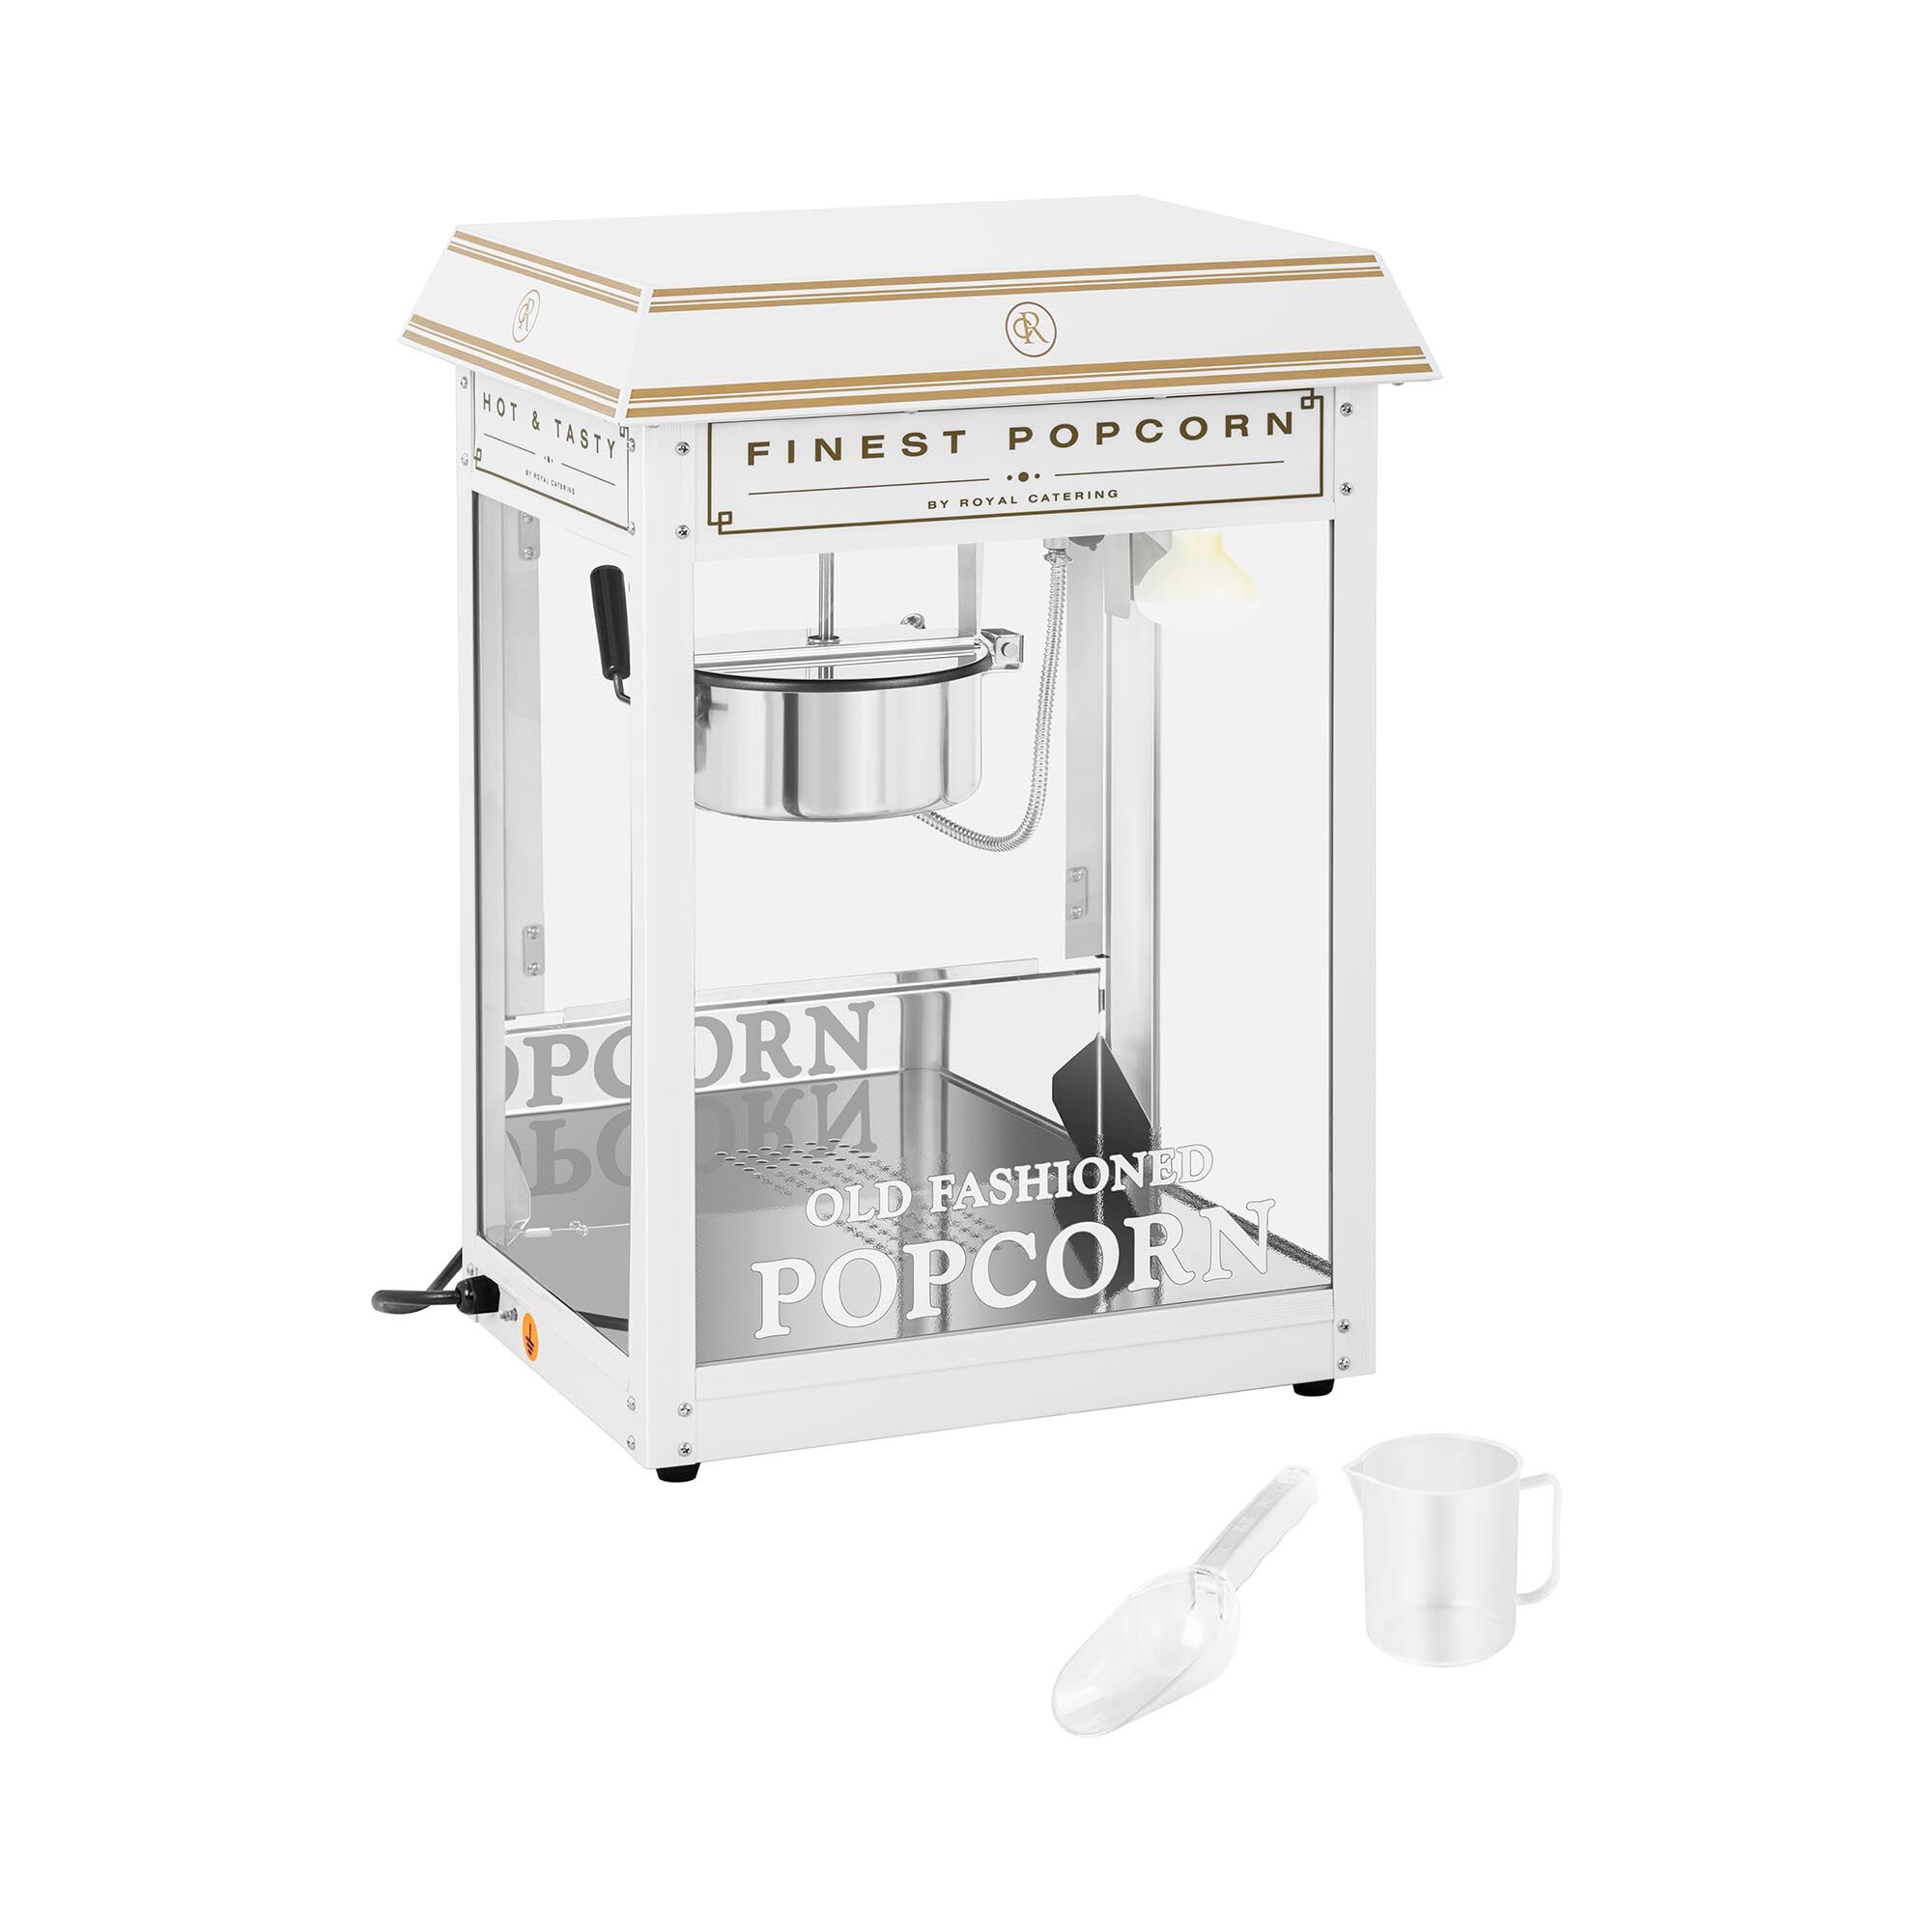 Royal Catering Popcorn Machine - white & gold RCPS-WG1